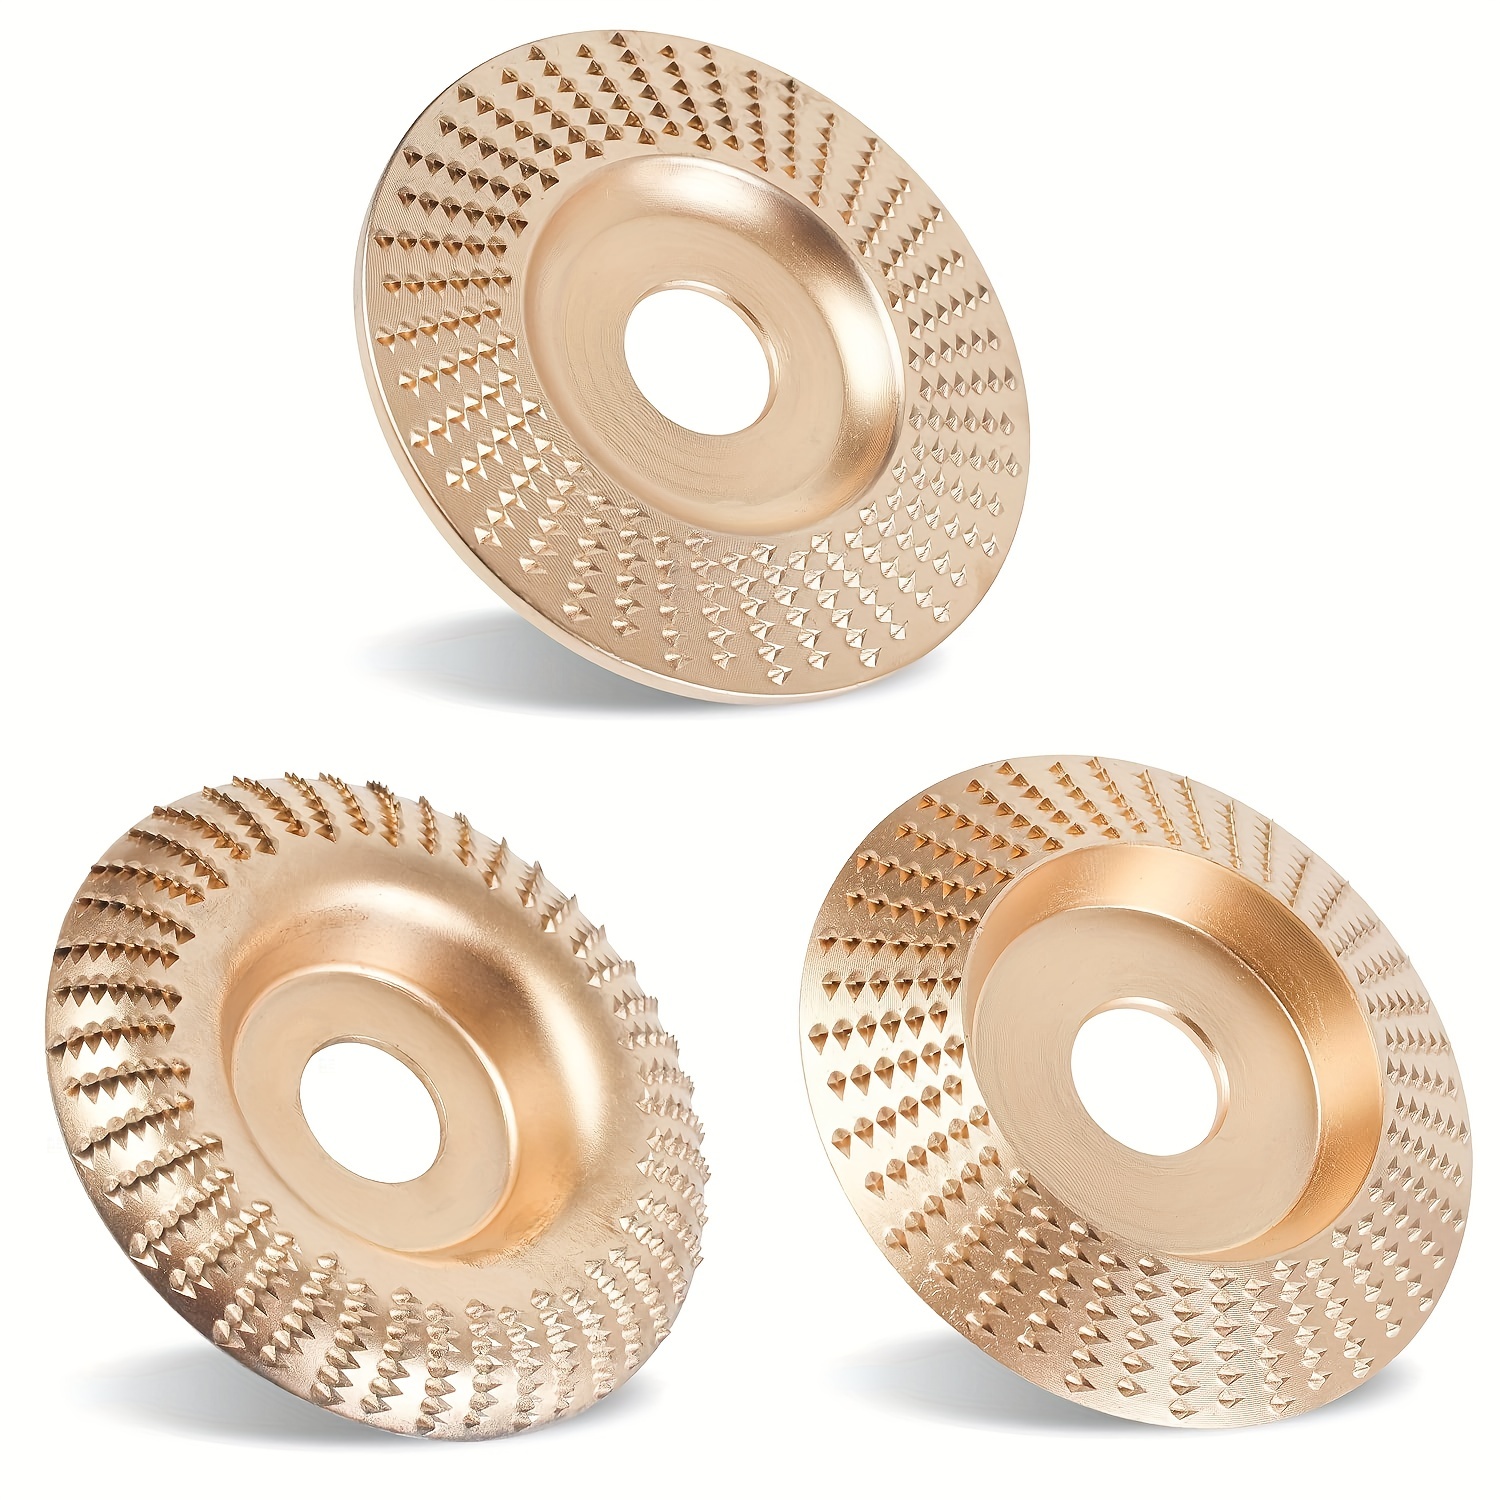 3pcs grinder wheel disc 4 inches wood shaping wheel wood grinding shaping disc for angle grinders with 7 8 arbor